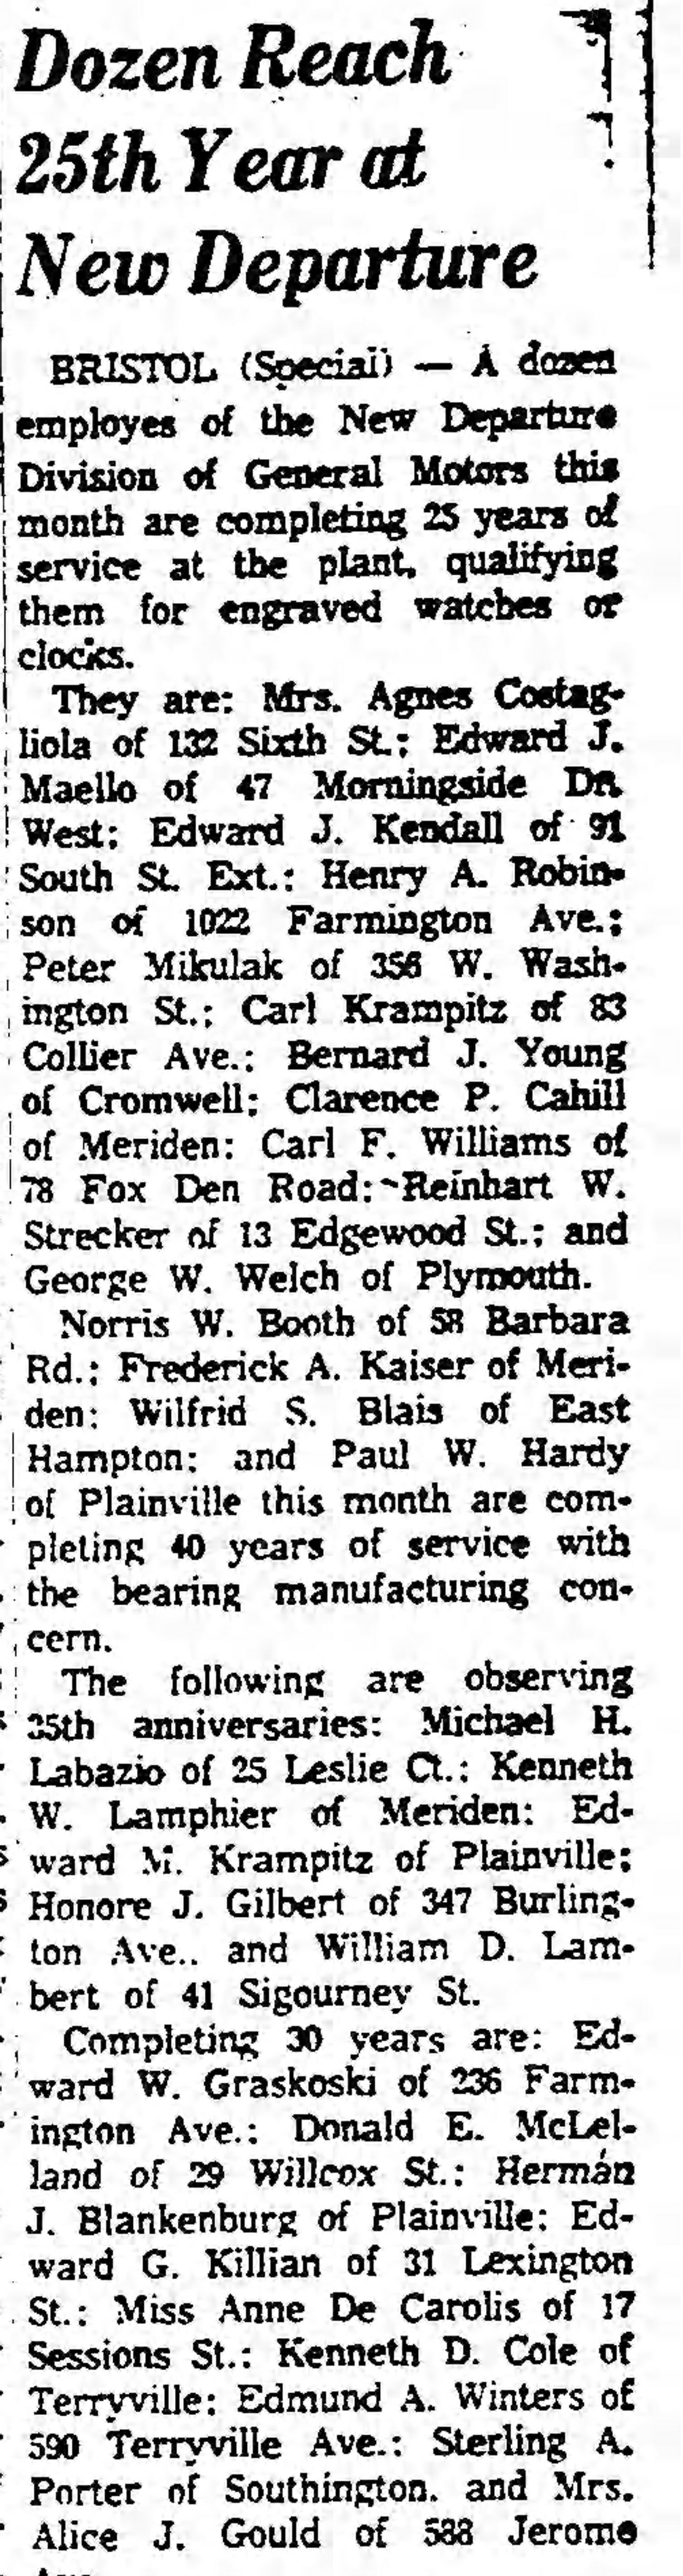 Paul Hardy Career Comendation, Hartford Courant, 1963